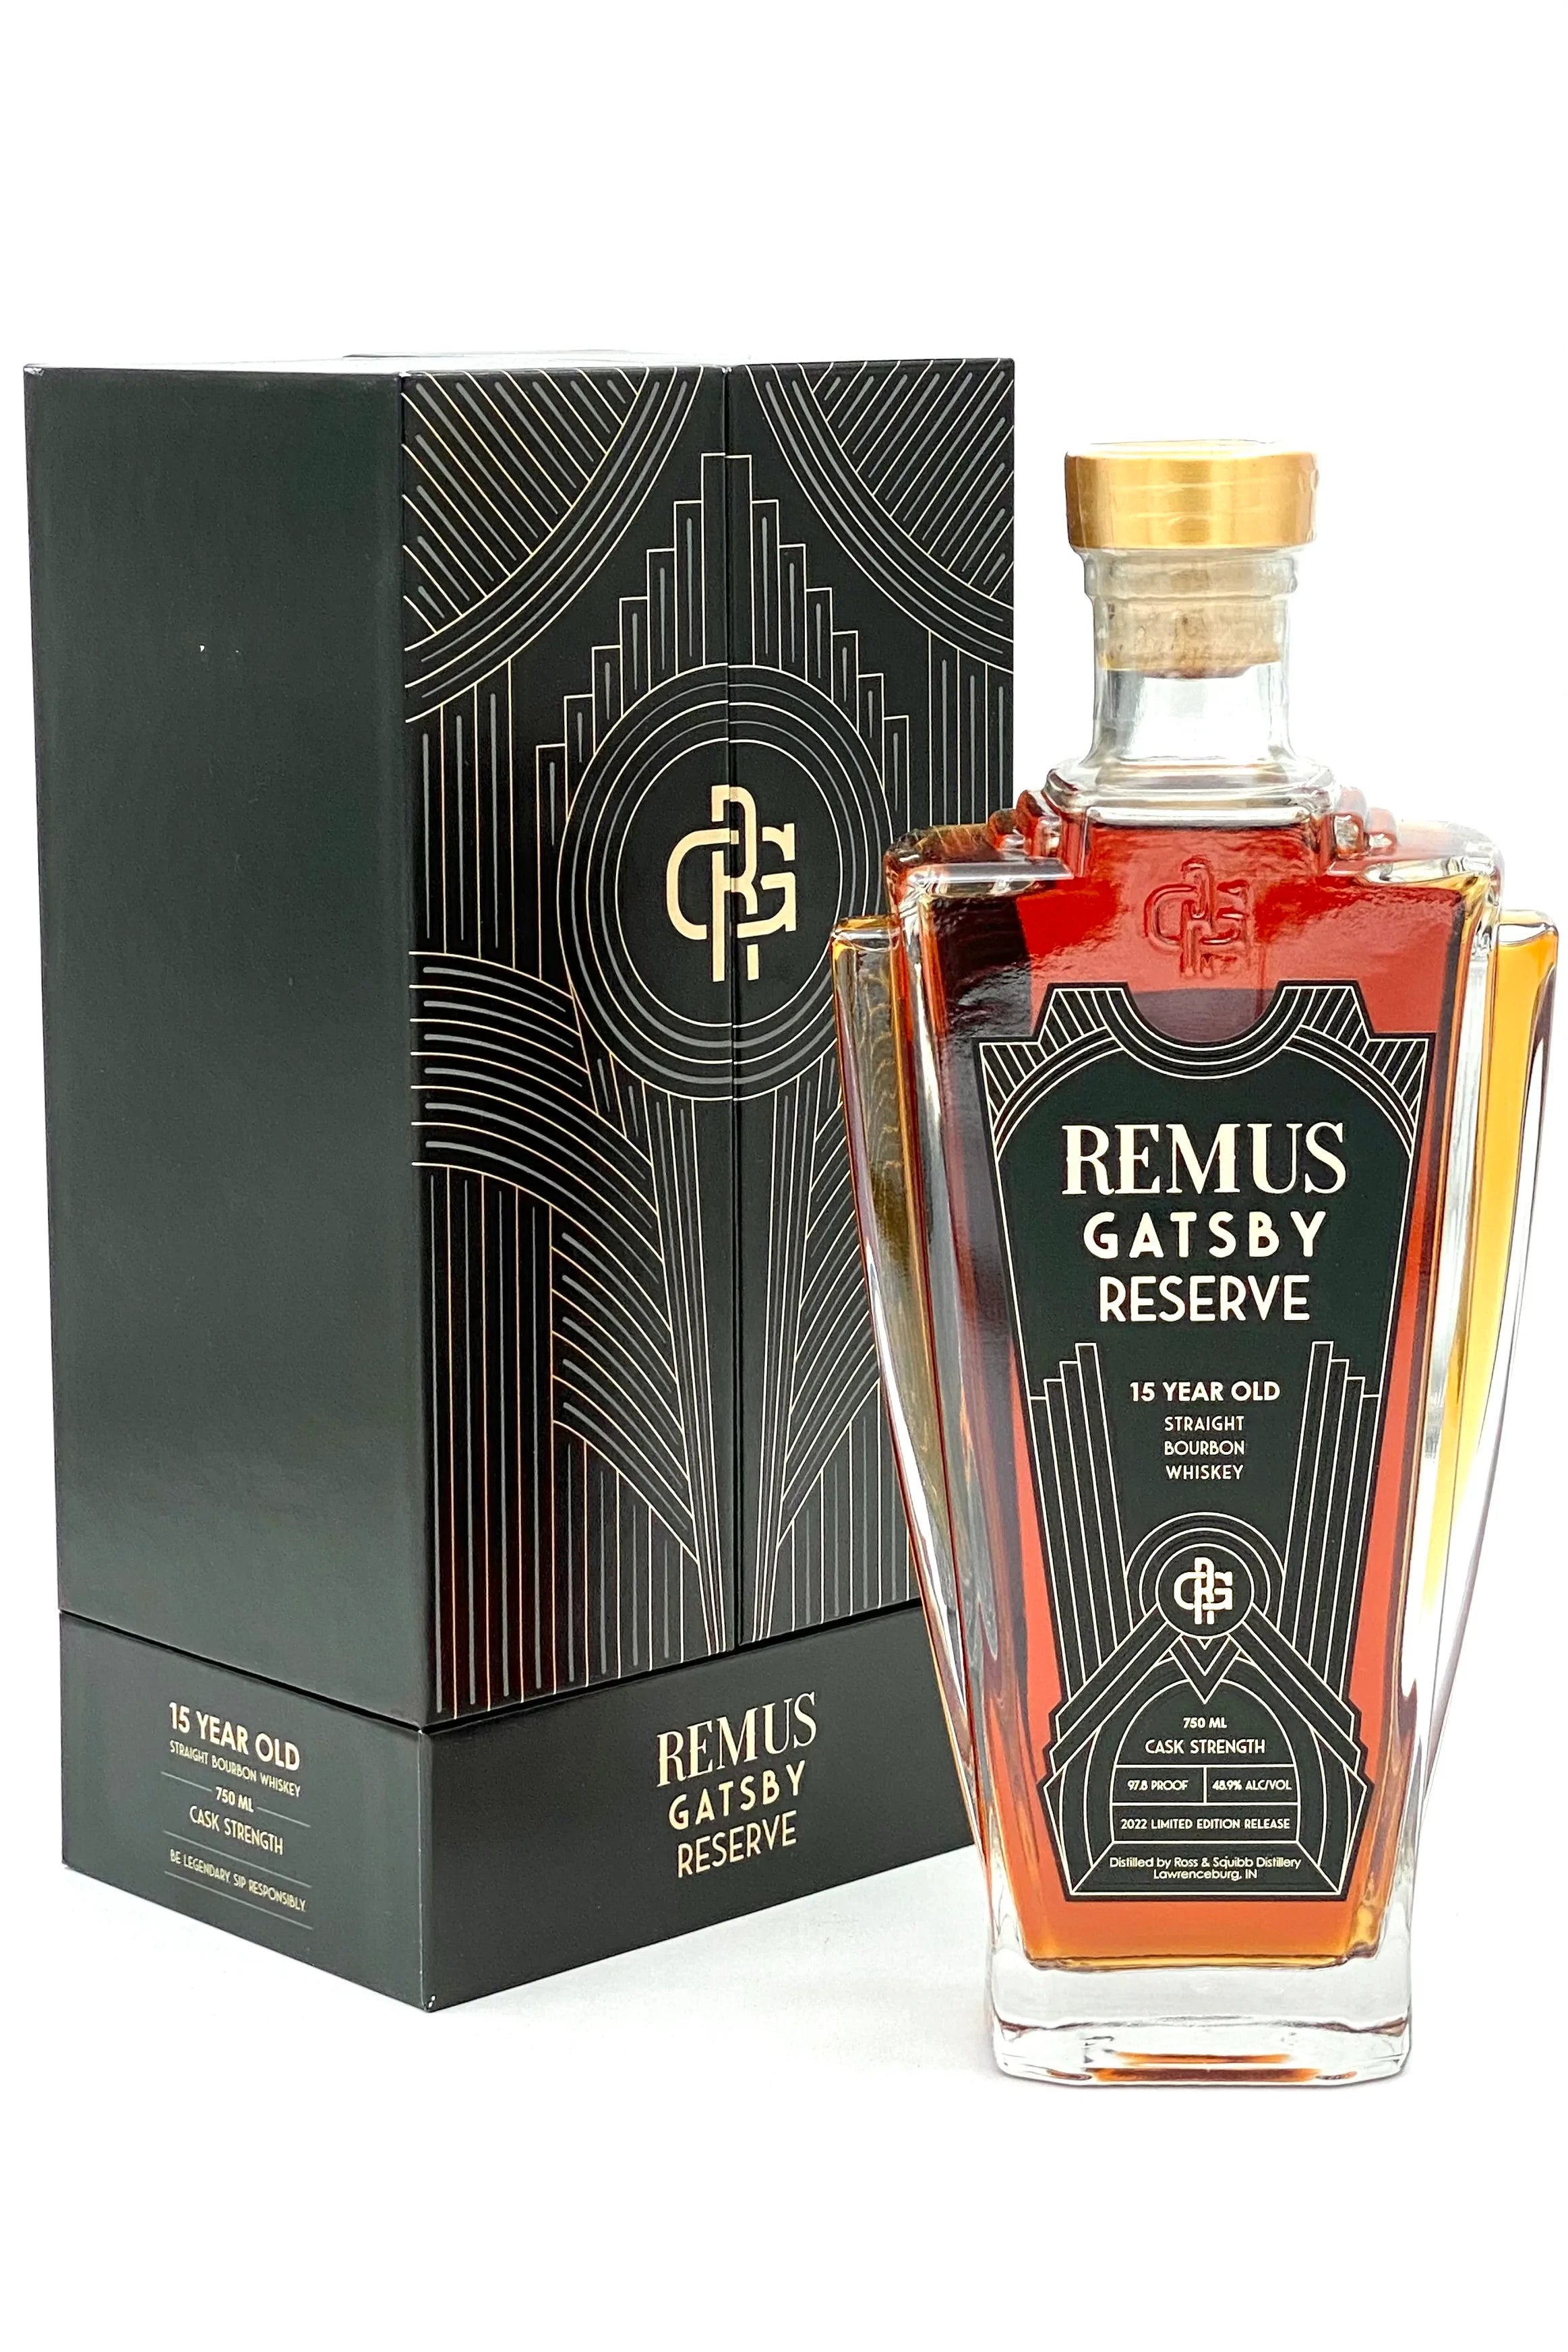 Remus Gatsby Reserve 15 Year Old Cask Strength Bourbon